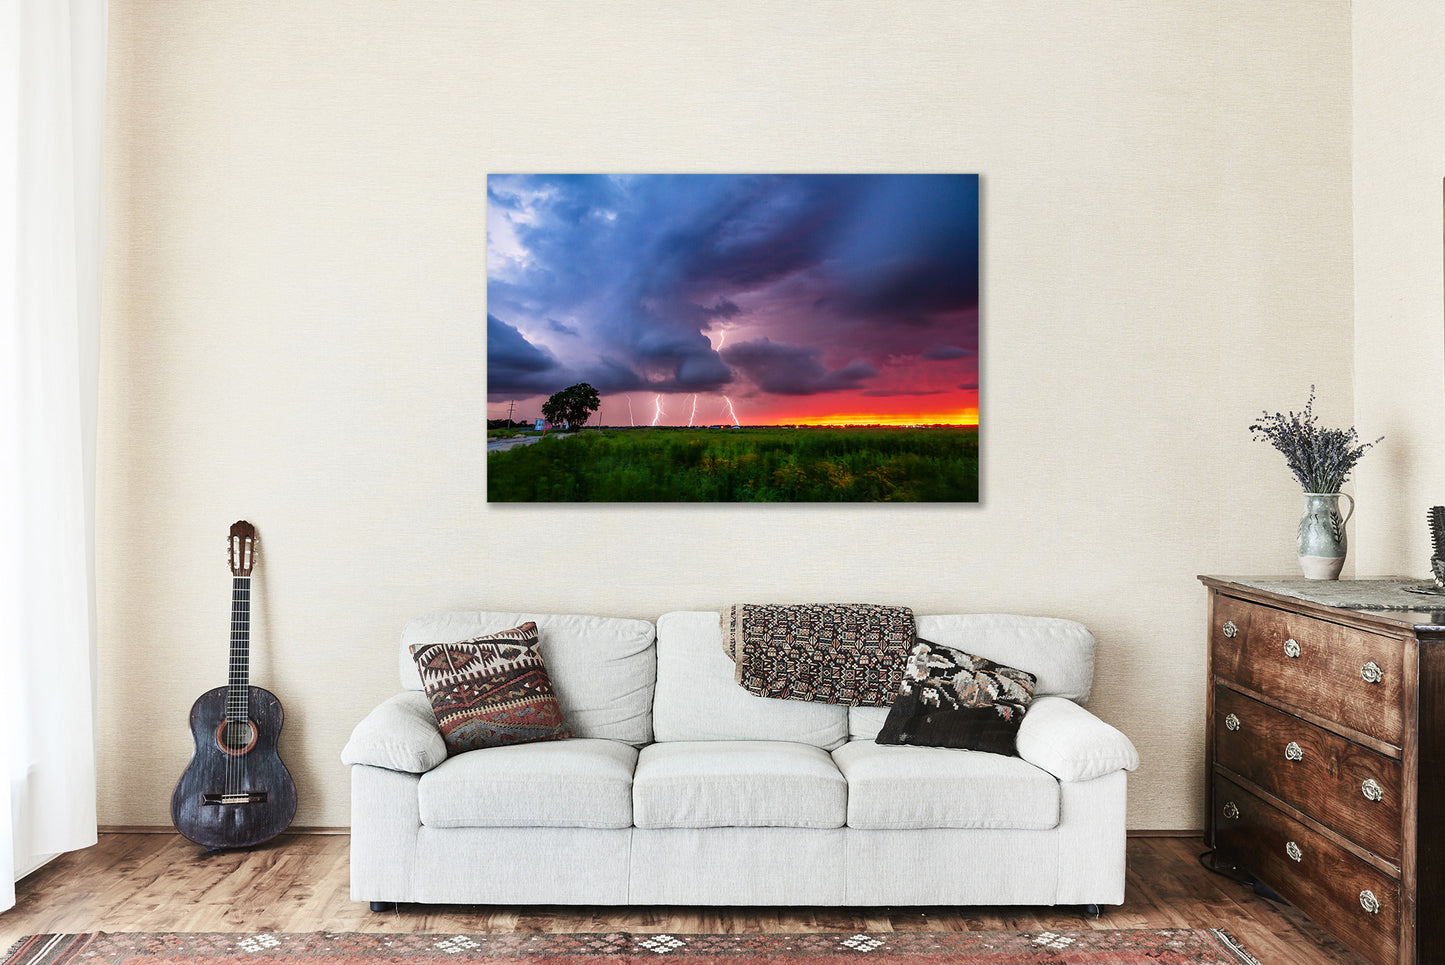 Storm Metal Print - Picture of Multiple Lightning Strikes in Thunderstorm at Sunset in Oklahoma - Ready to Hang Weather Wall Art Decor